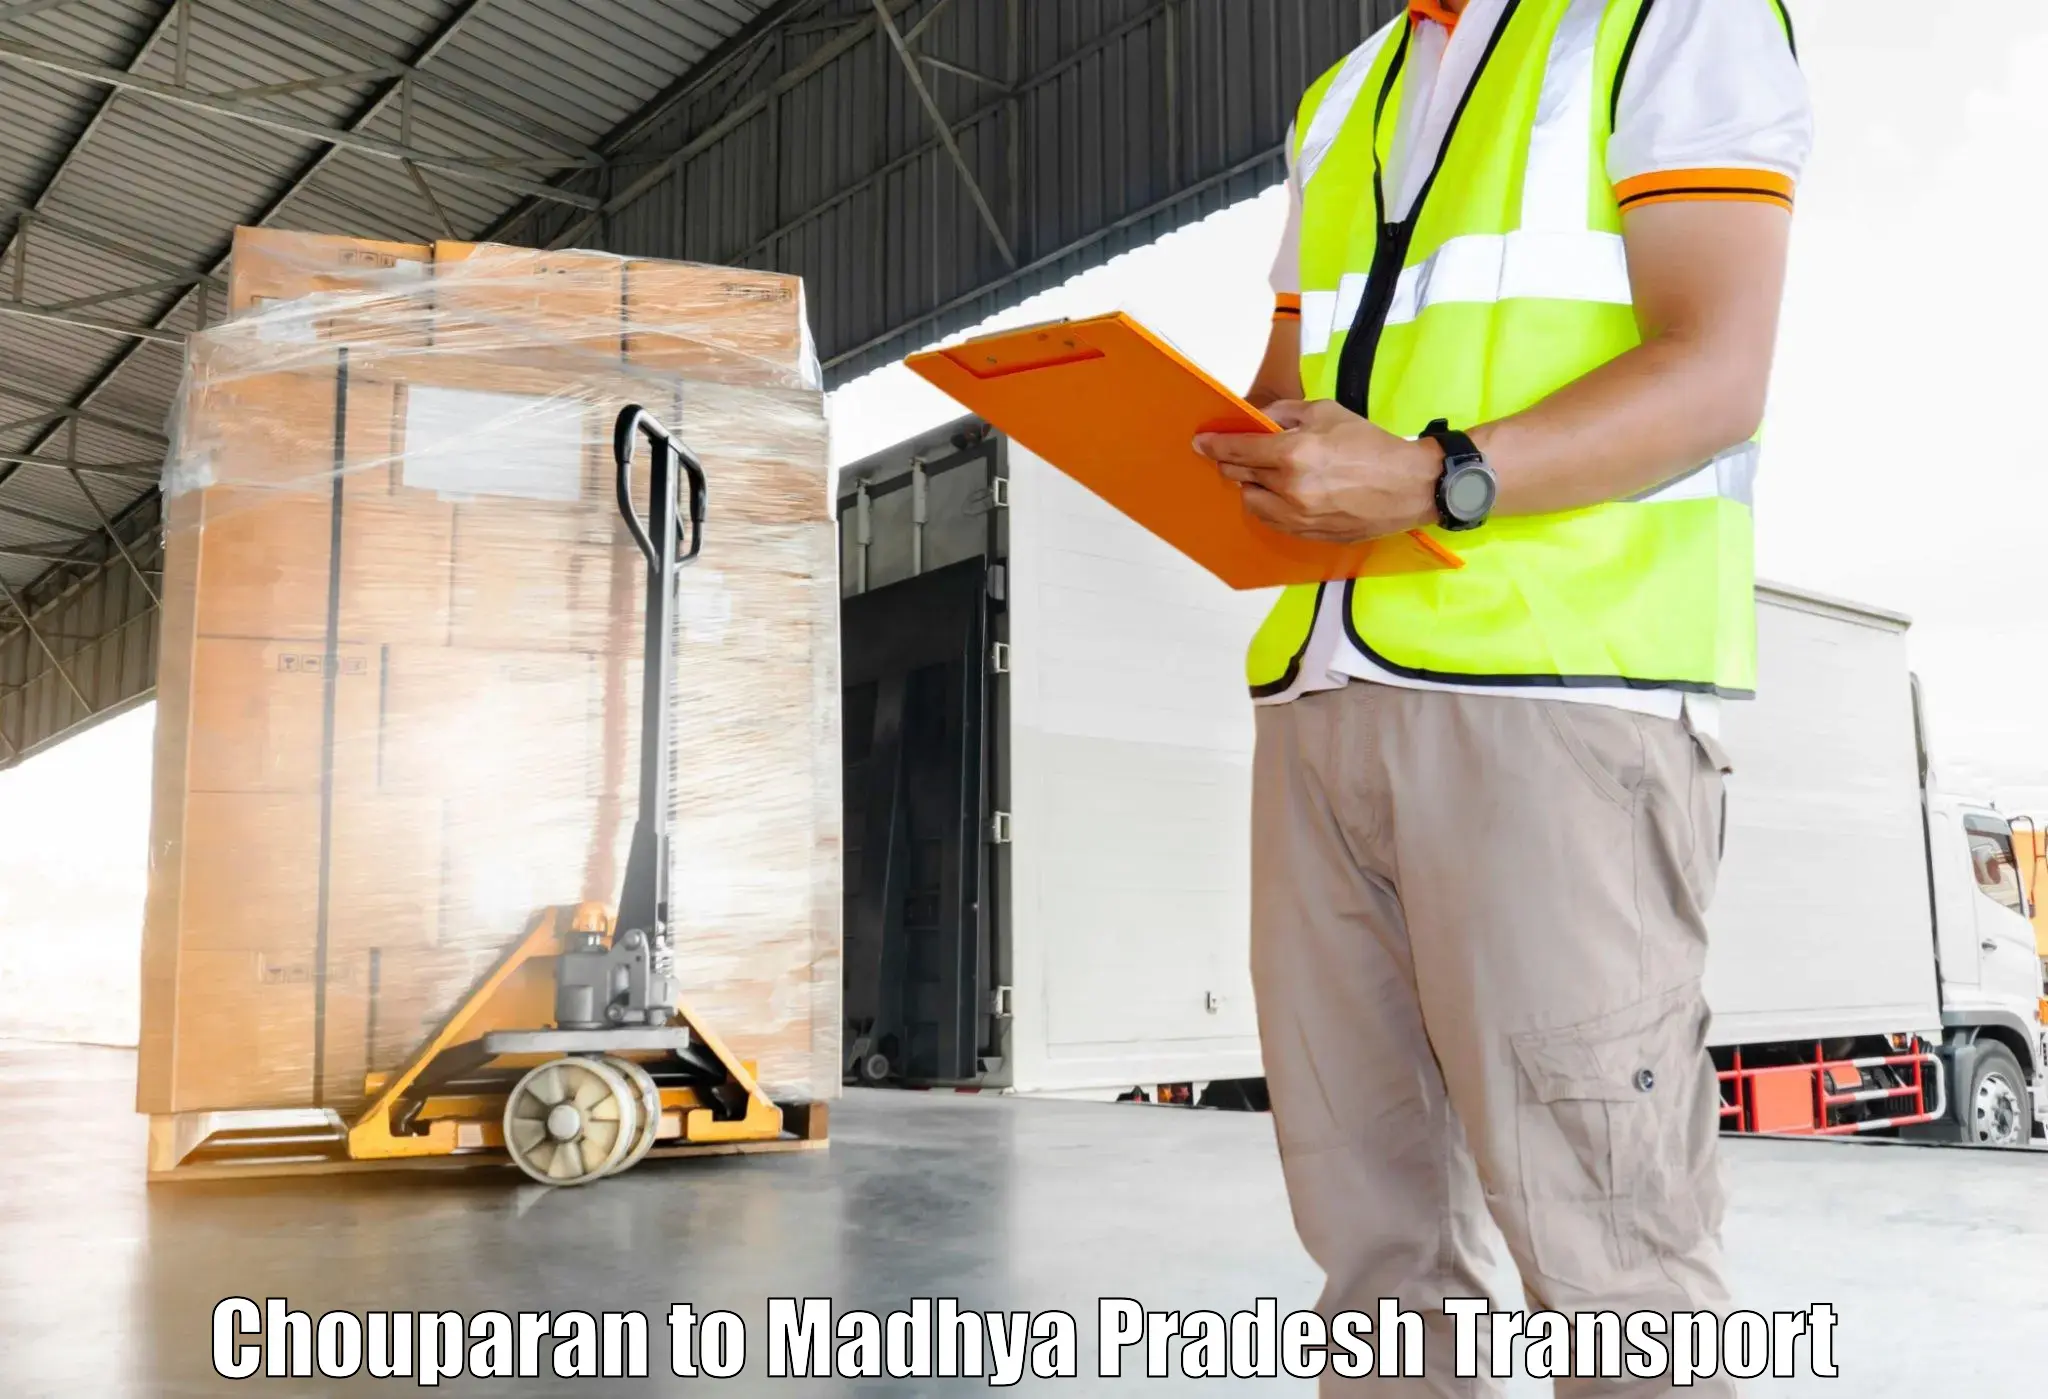 Container transport service Chouparan to Burhanpur